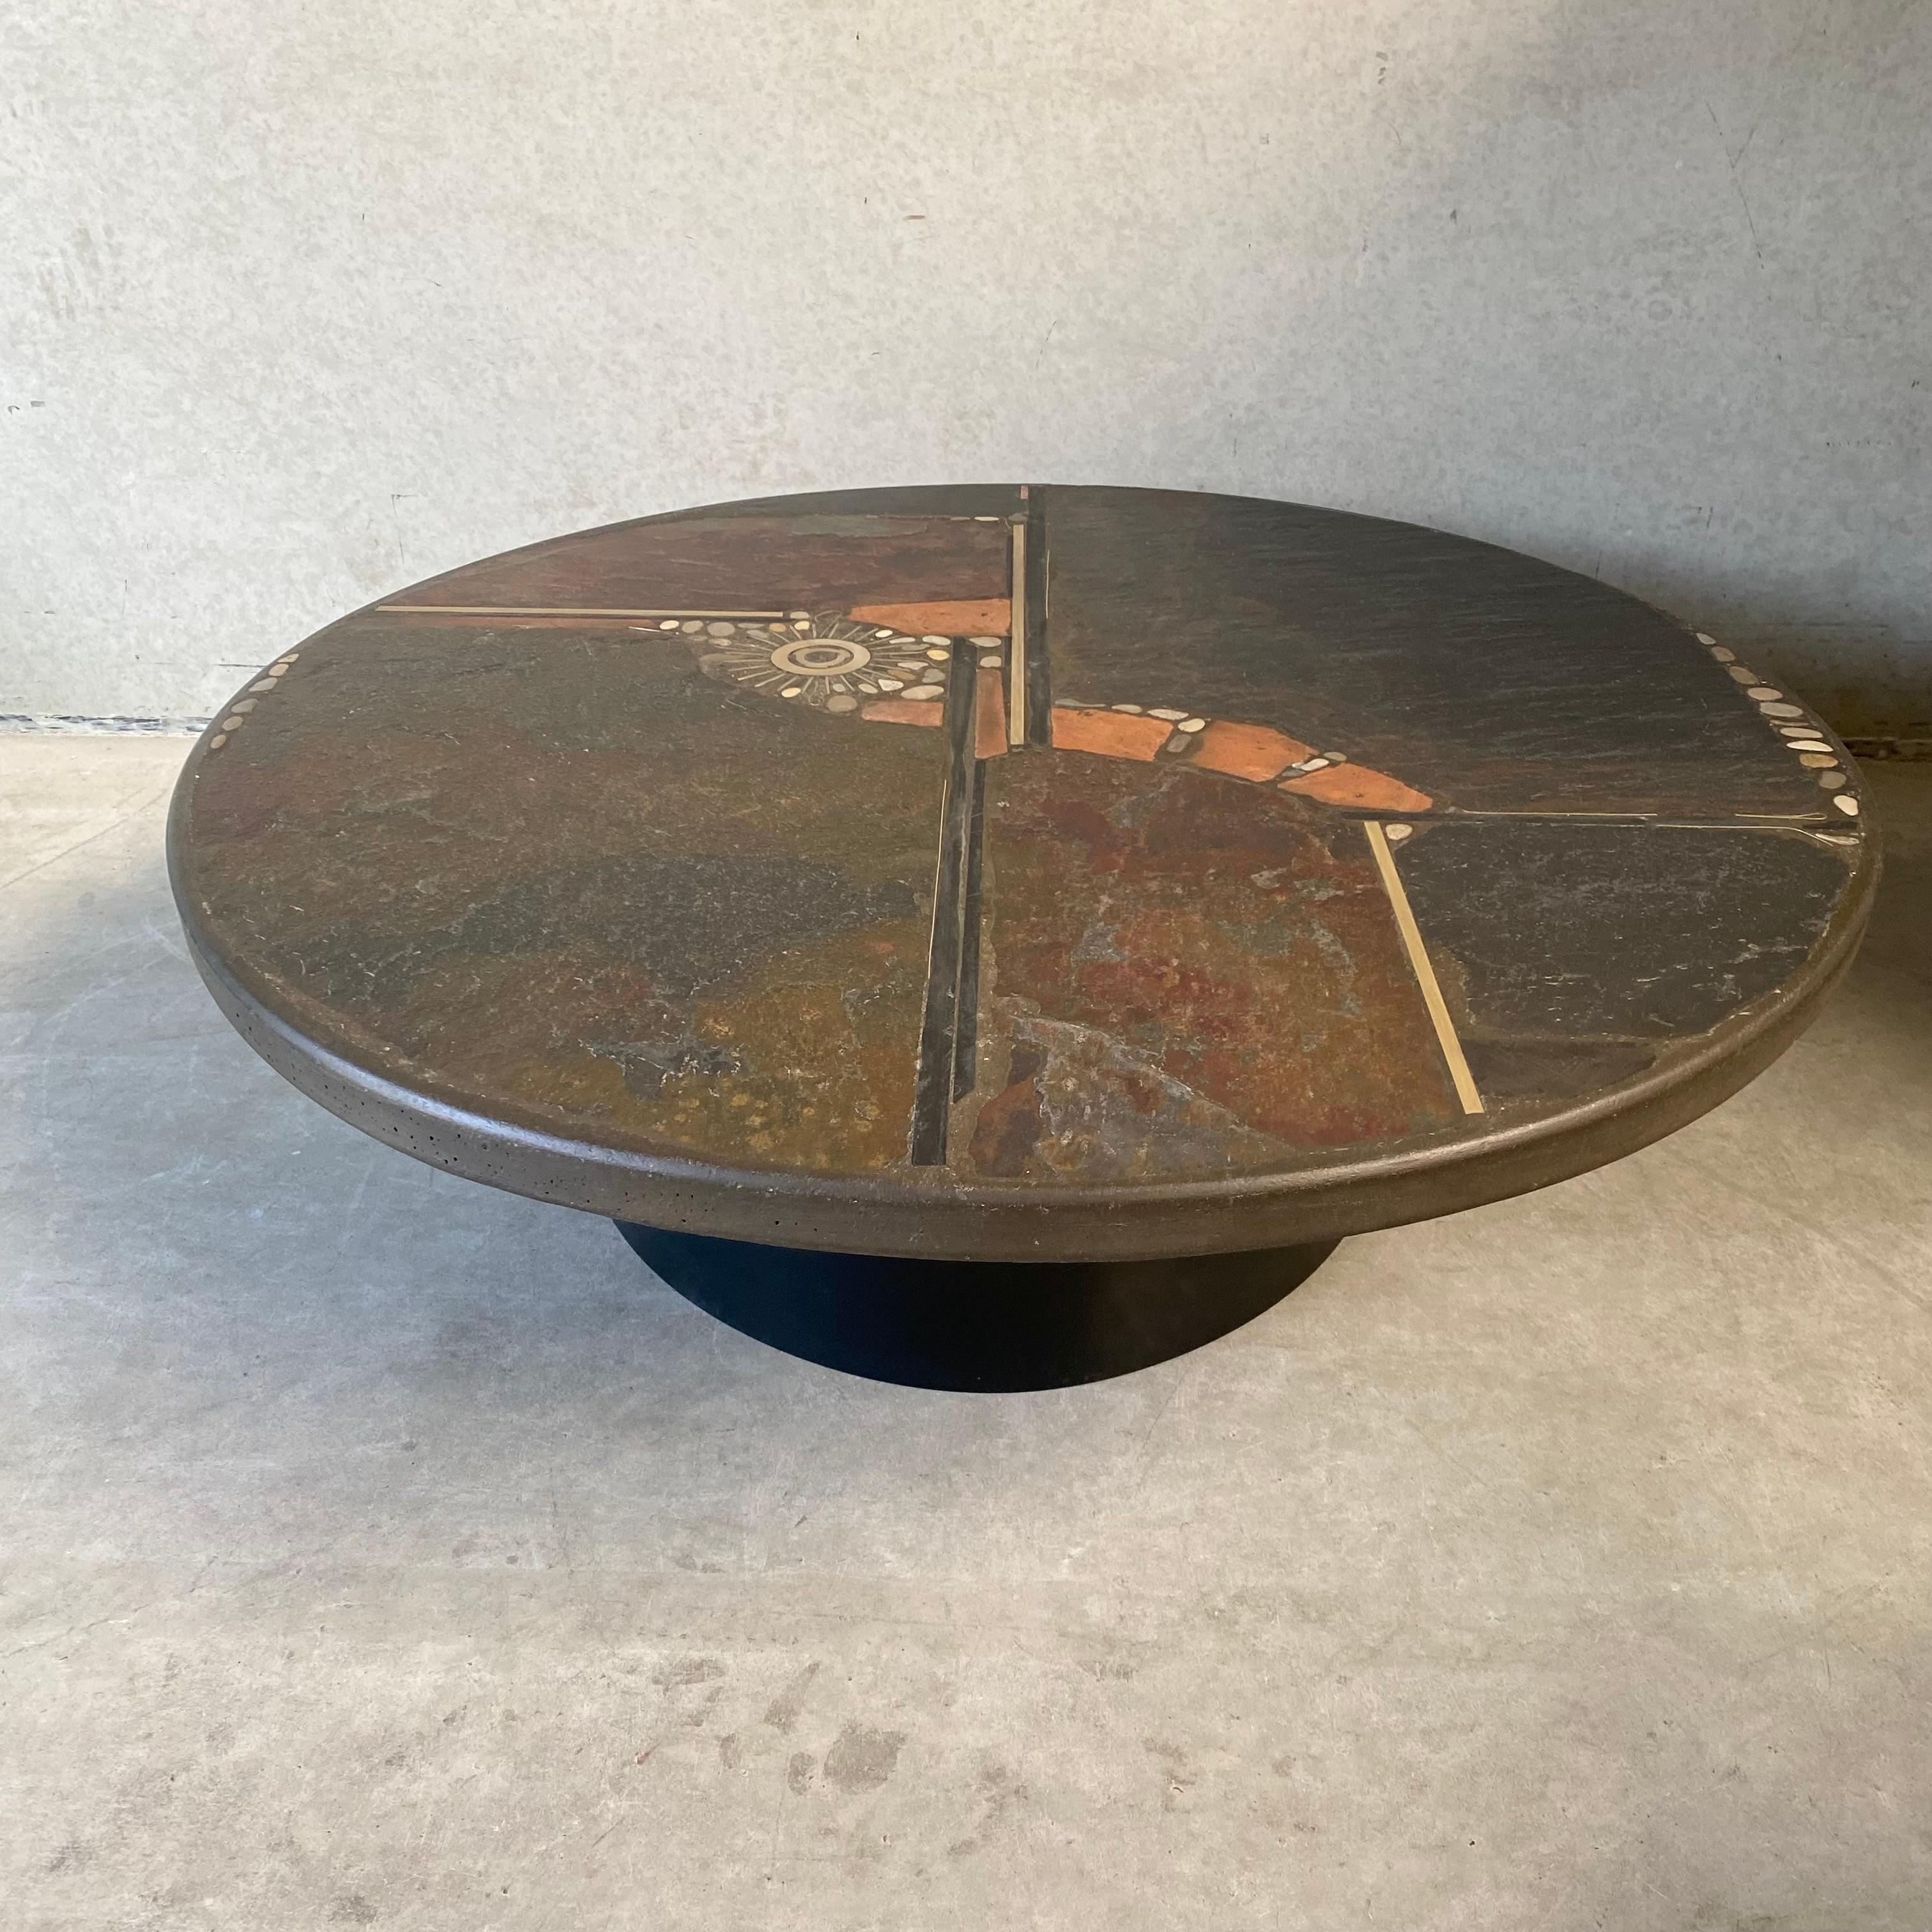 Dutch Brutalist Round Coffee Table by Sculptor Paul Kingma, Netherlands, 1985 For Sale